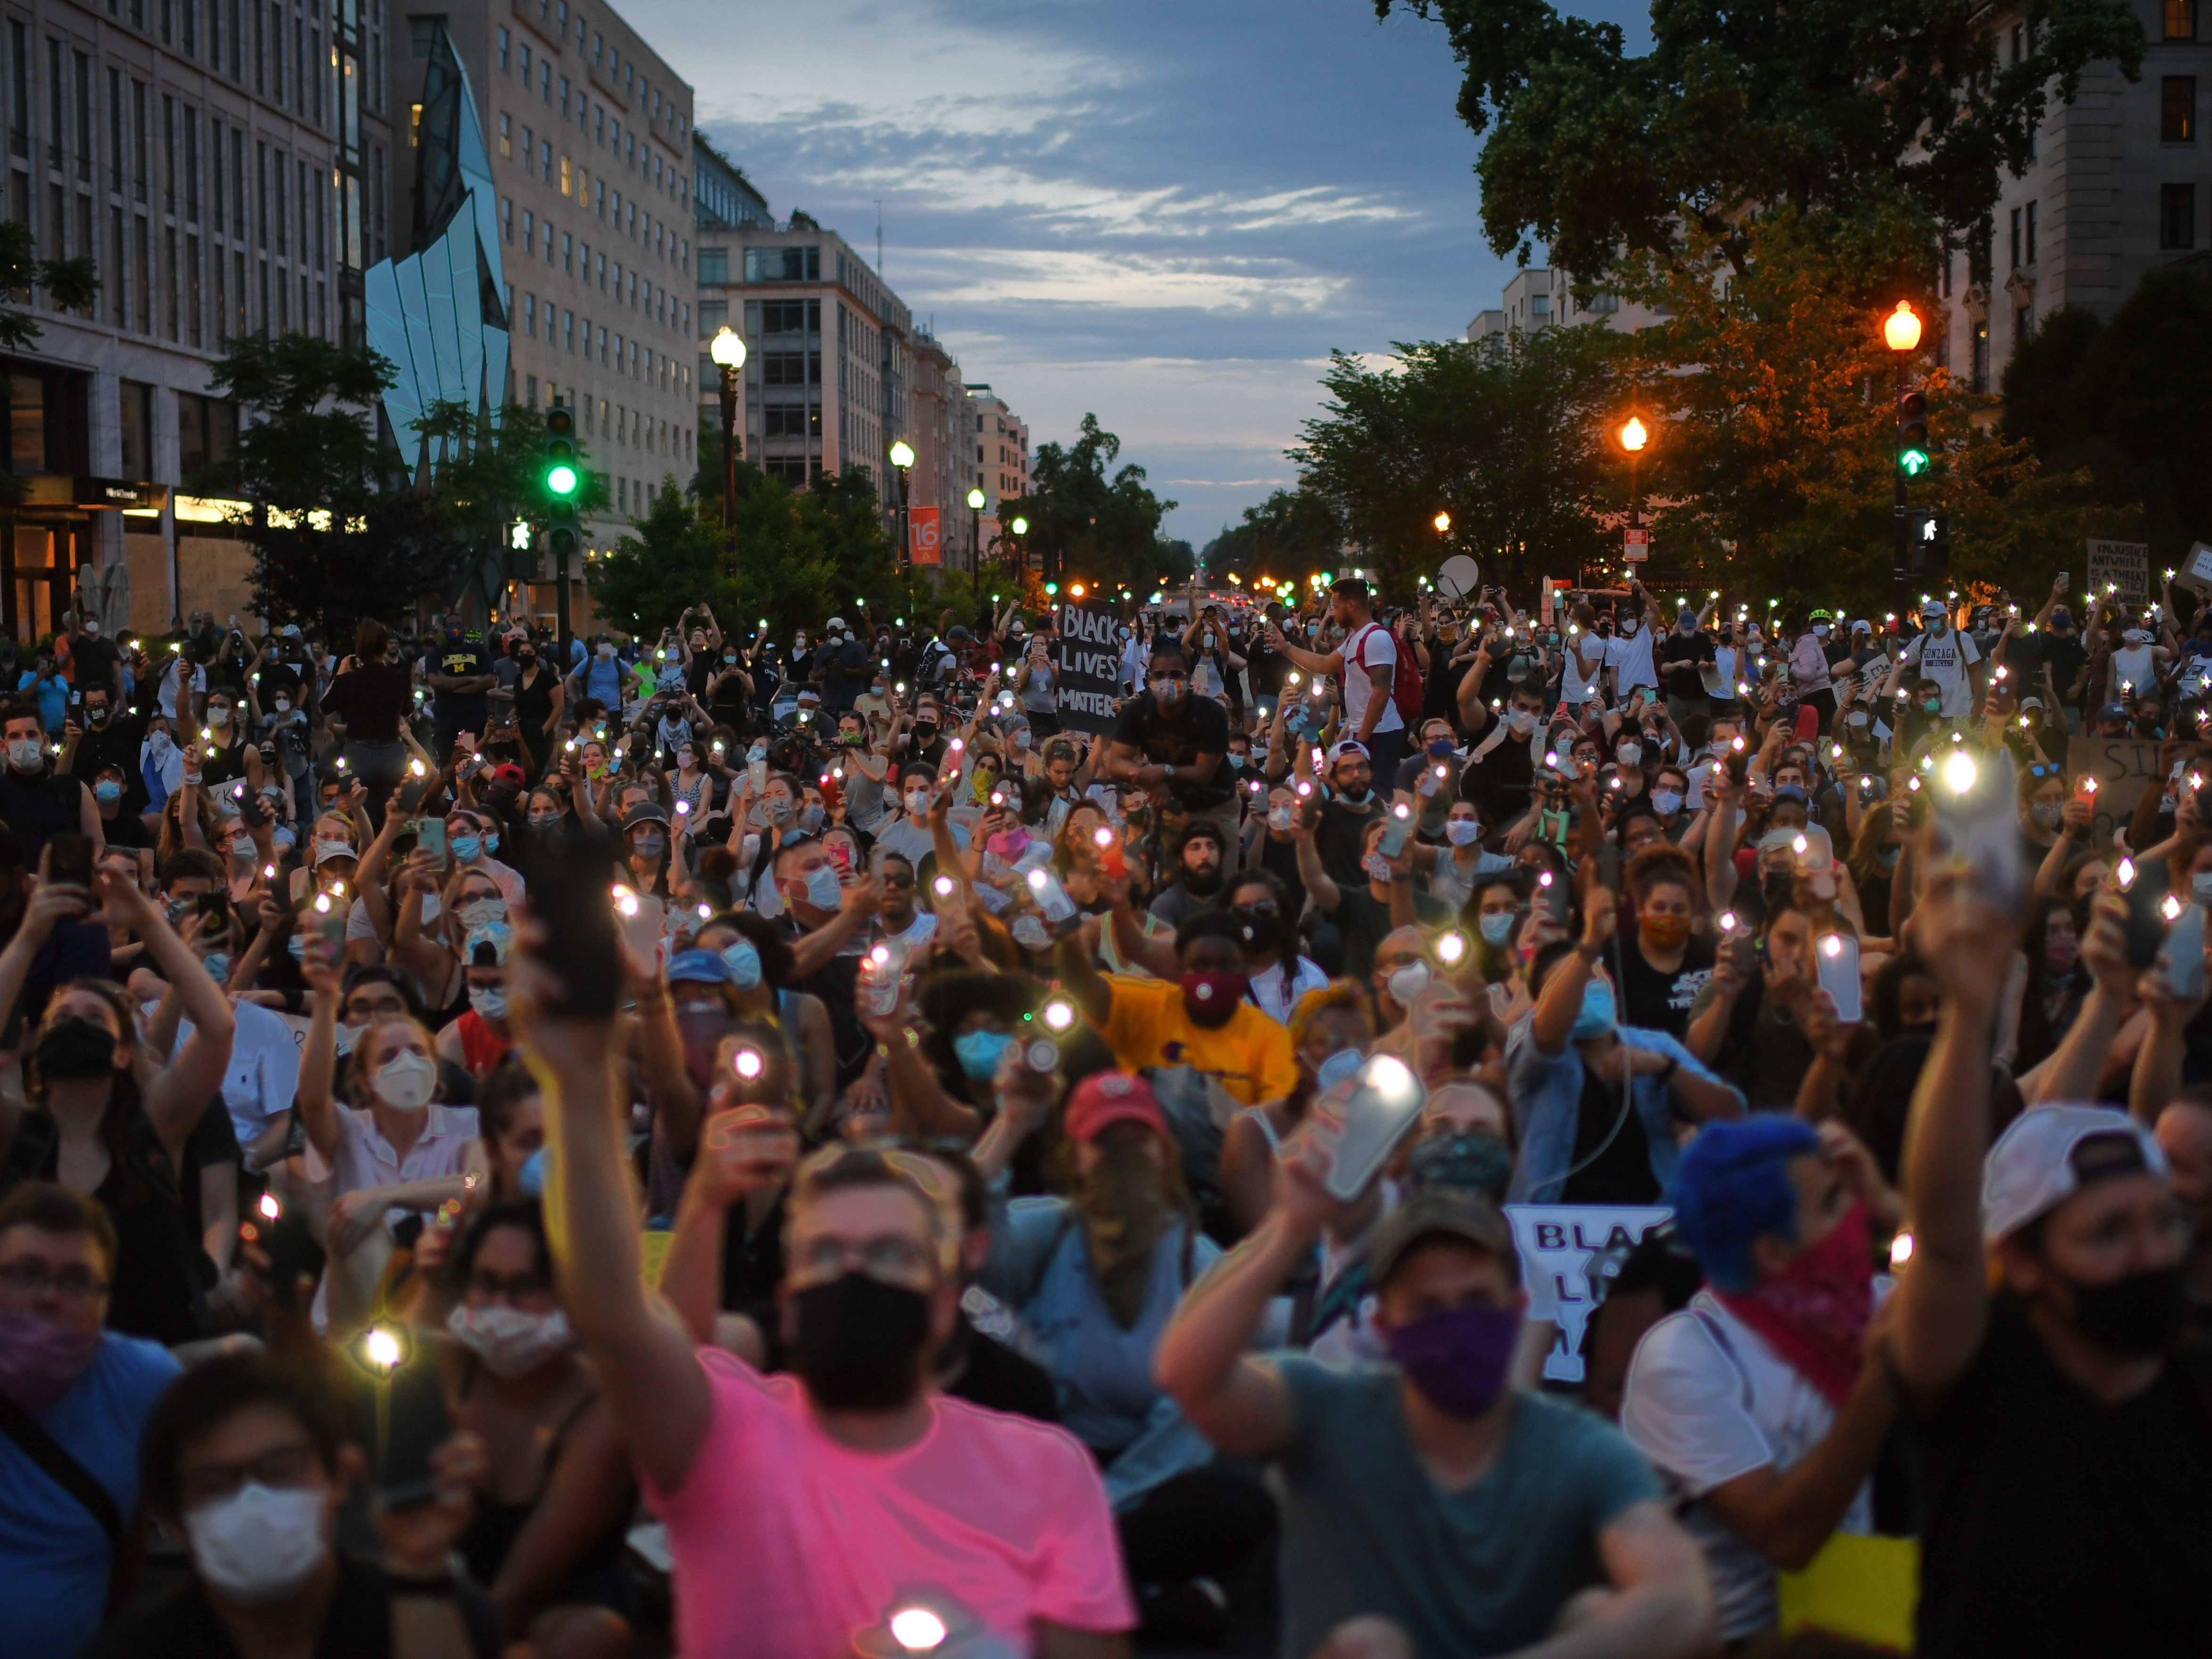 Protesters hold up their phones during a demonstration near the White House over the death of George Floyd.